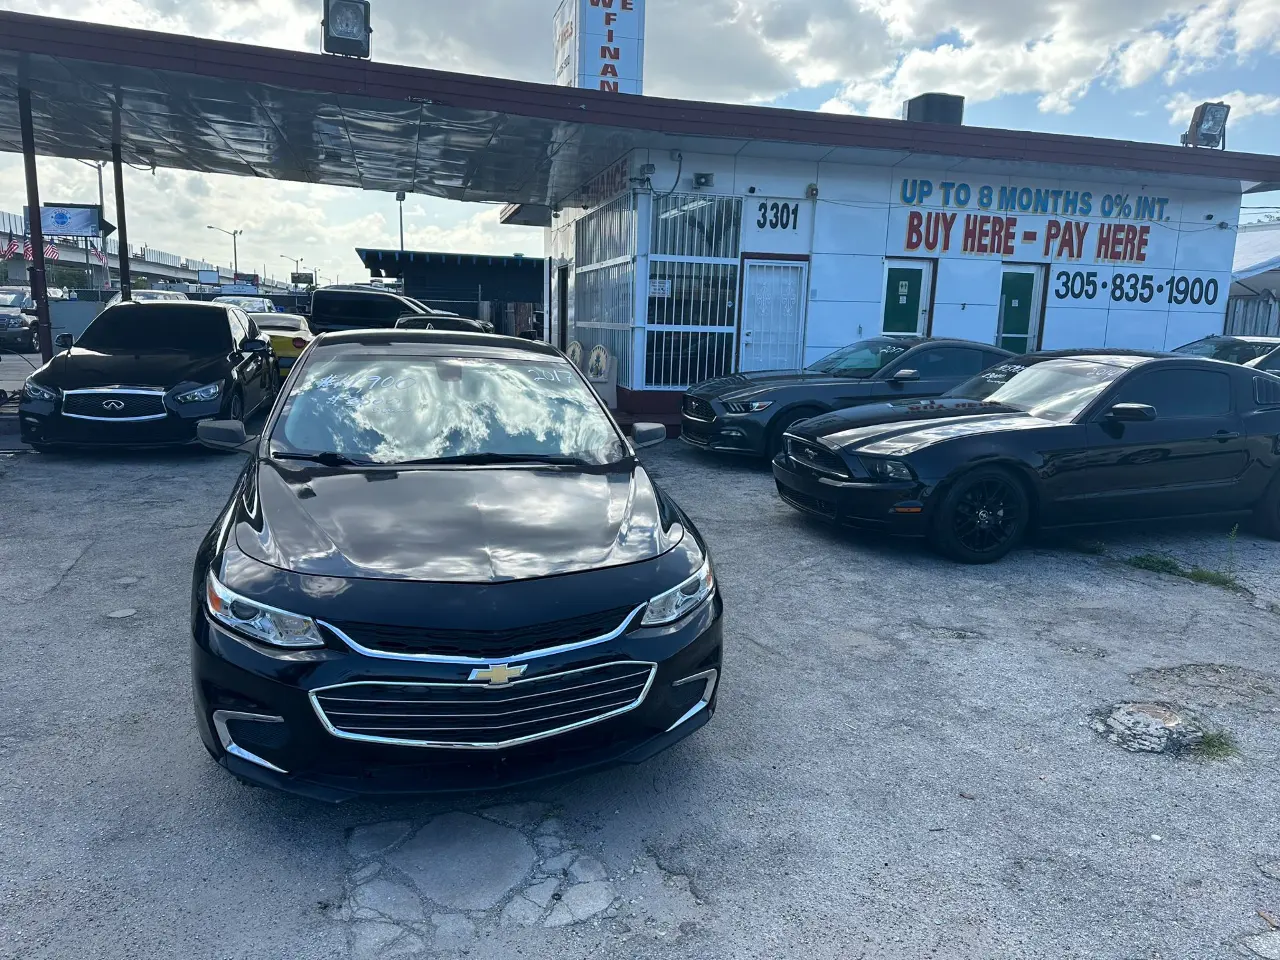 used 2017 Chevrolet Malibu - front view 2